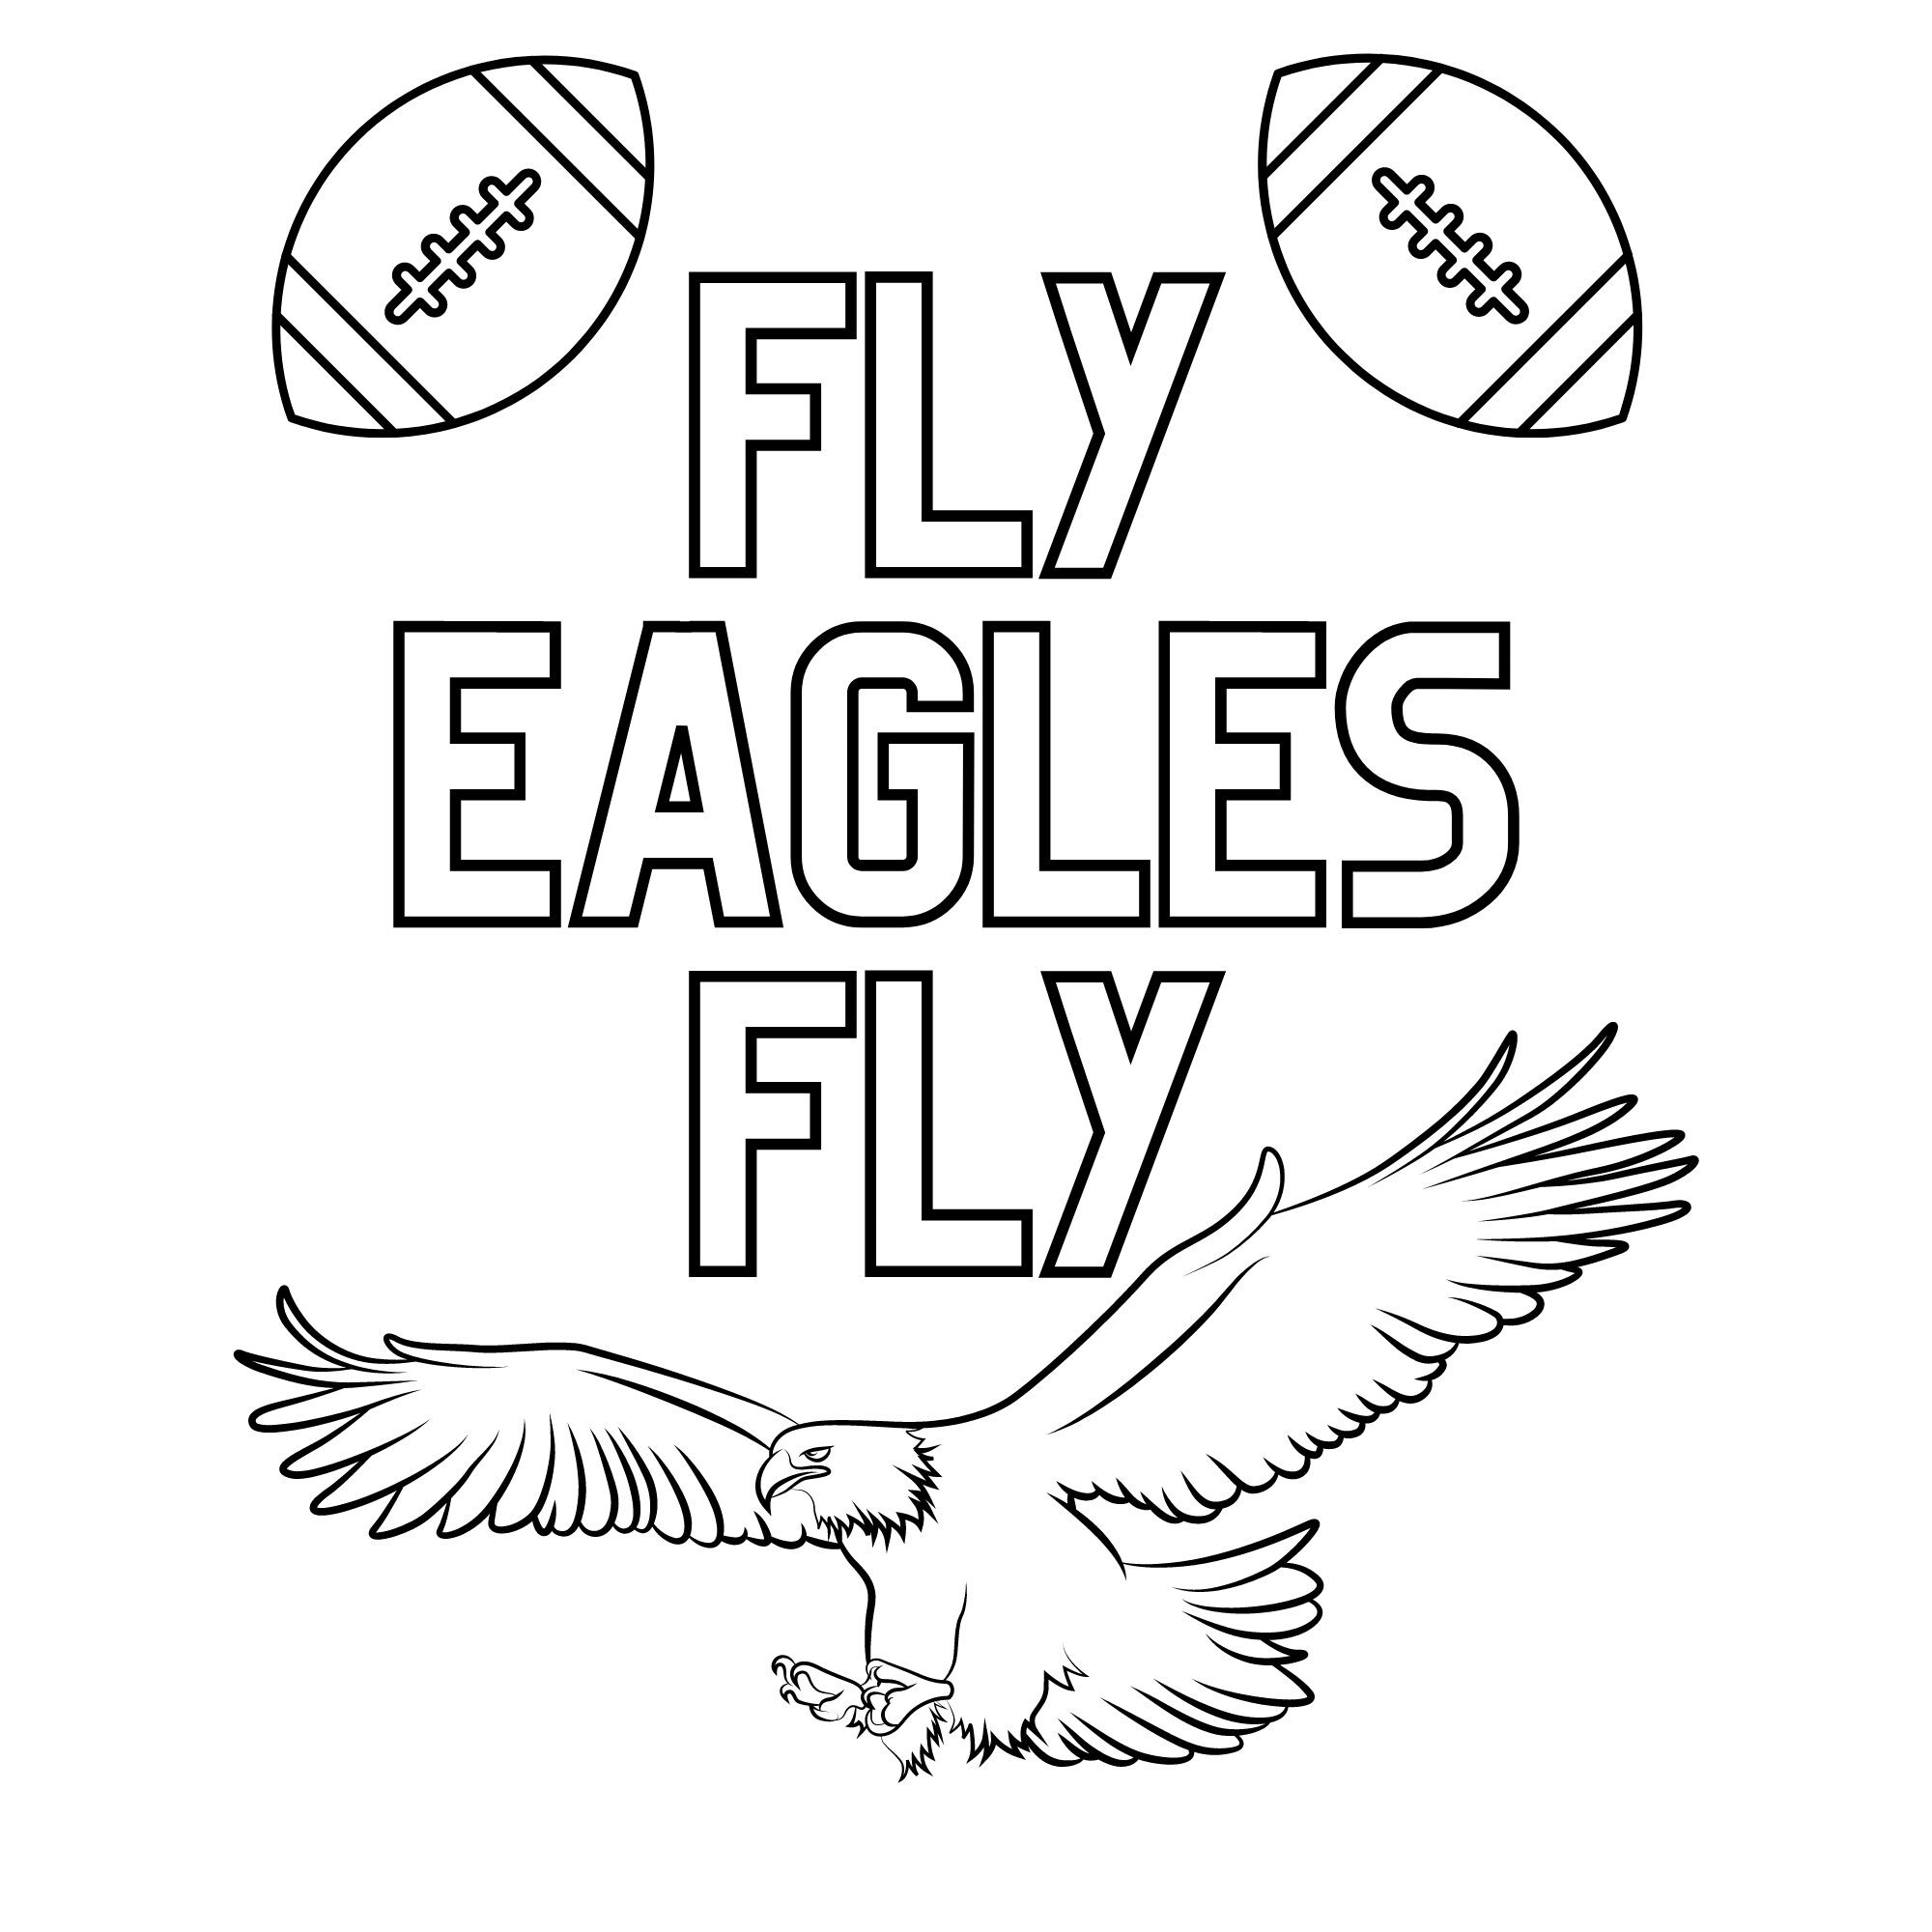 Fly eagles fly kids printable coloring page